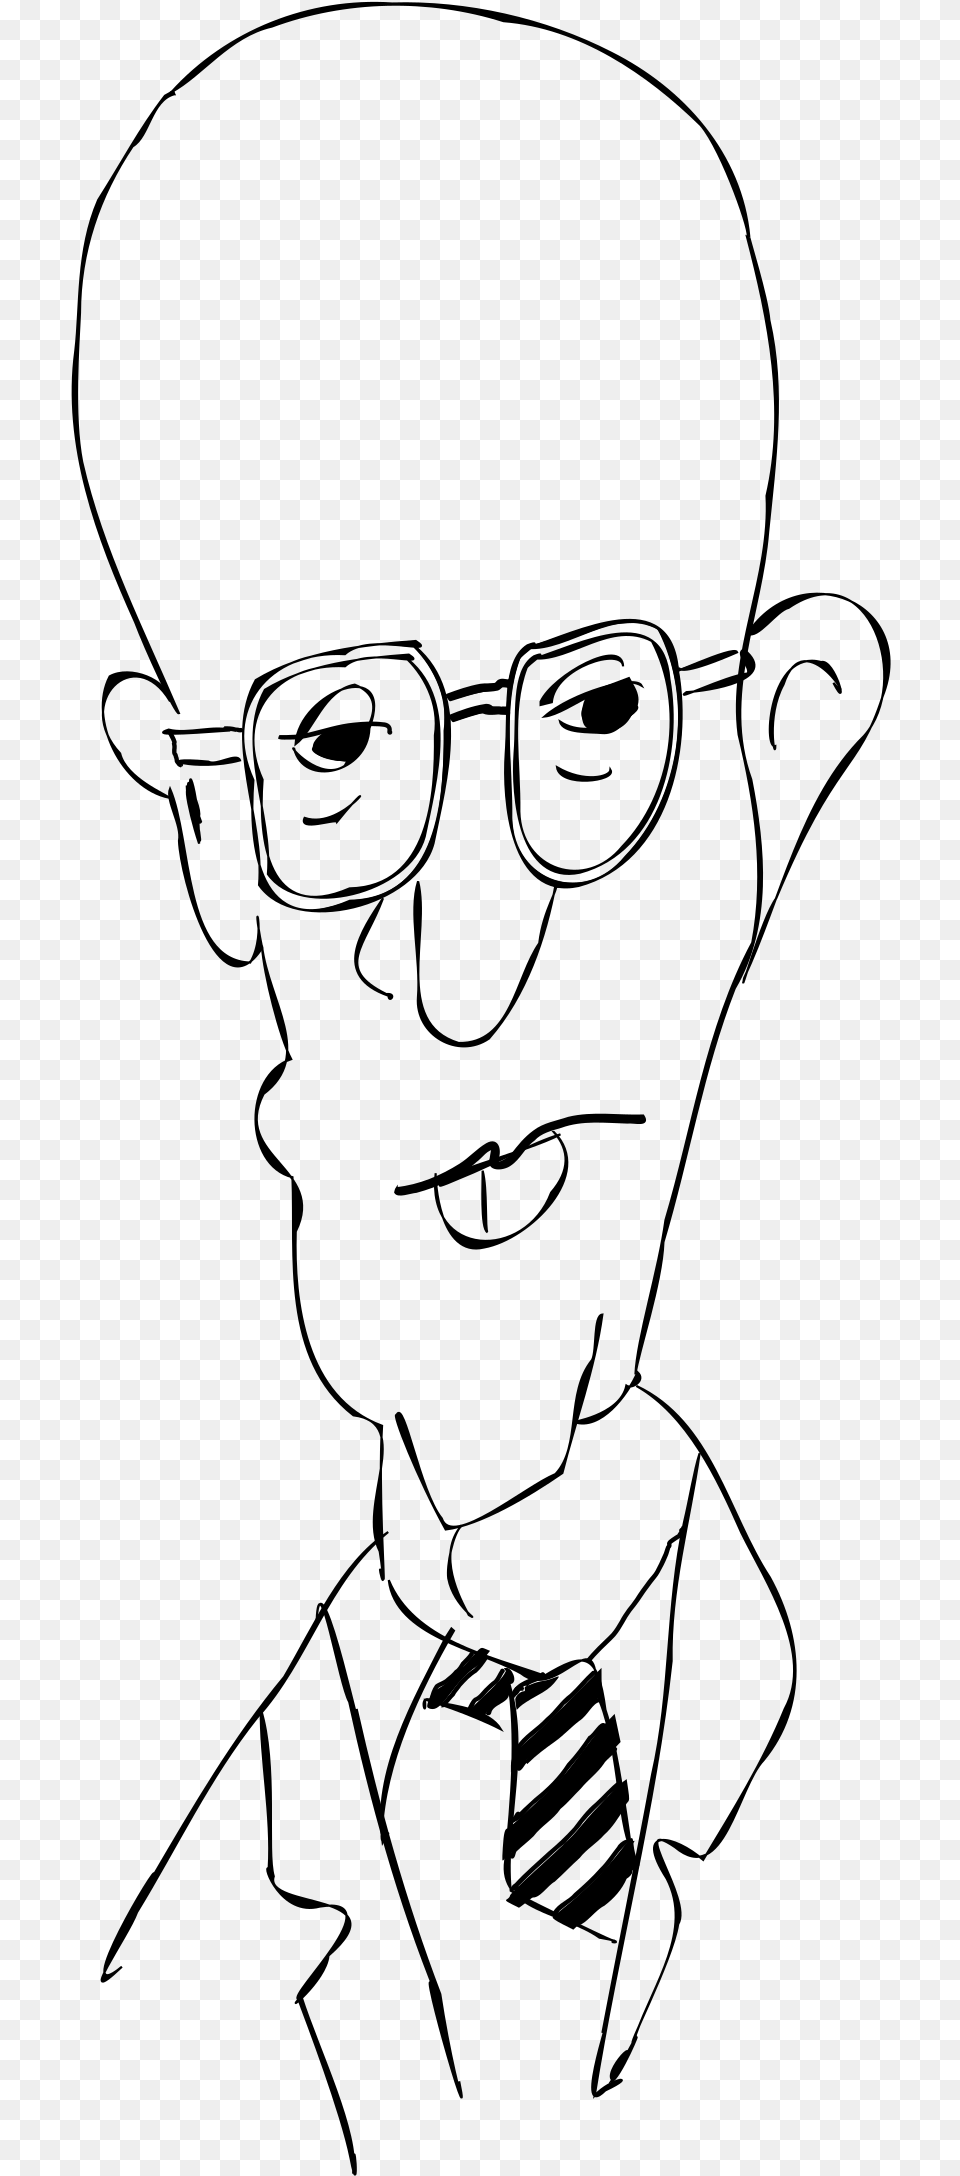 Remix Of Woody Allen Caricature Outline Clip Arts Caricature Outlines, Gray Png Image